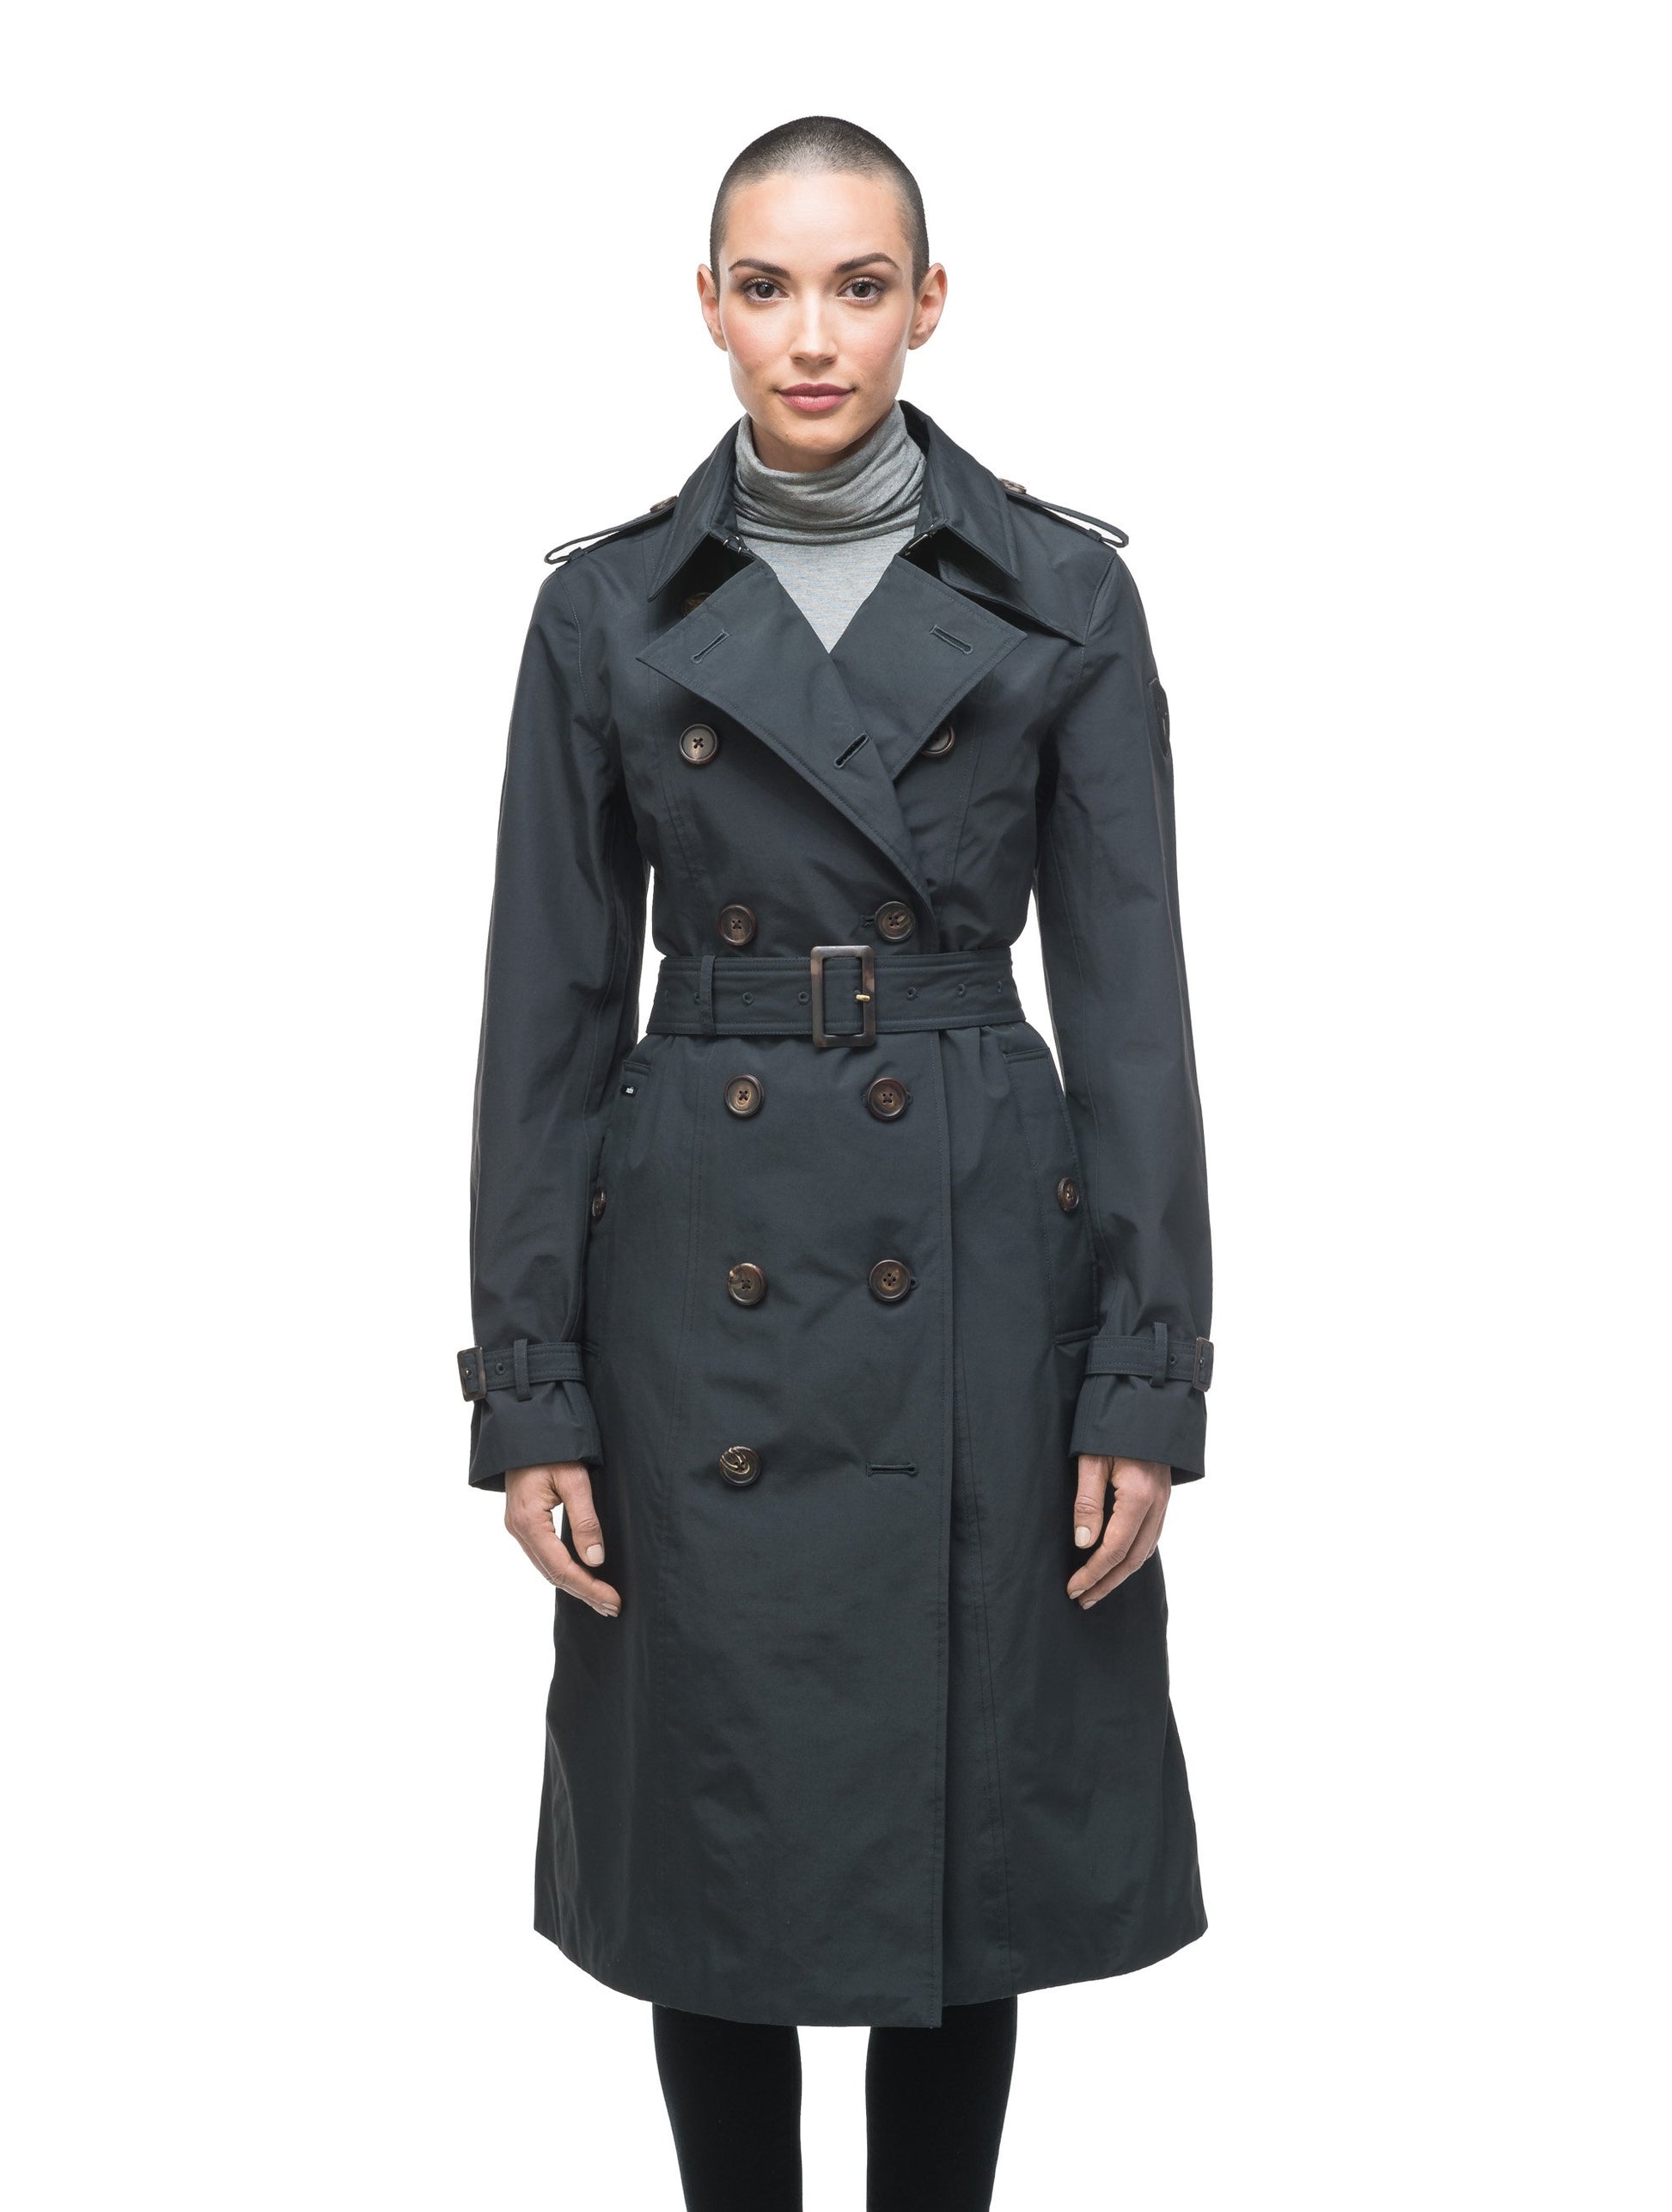 Women's knee length trench coat with removable belt in Navy